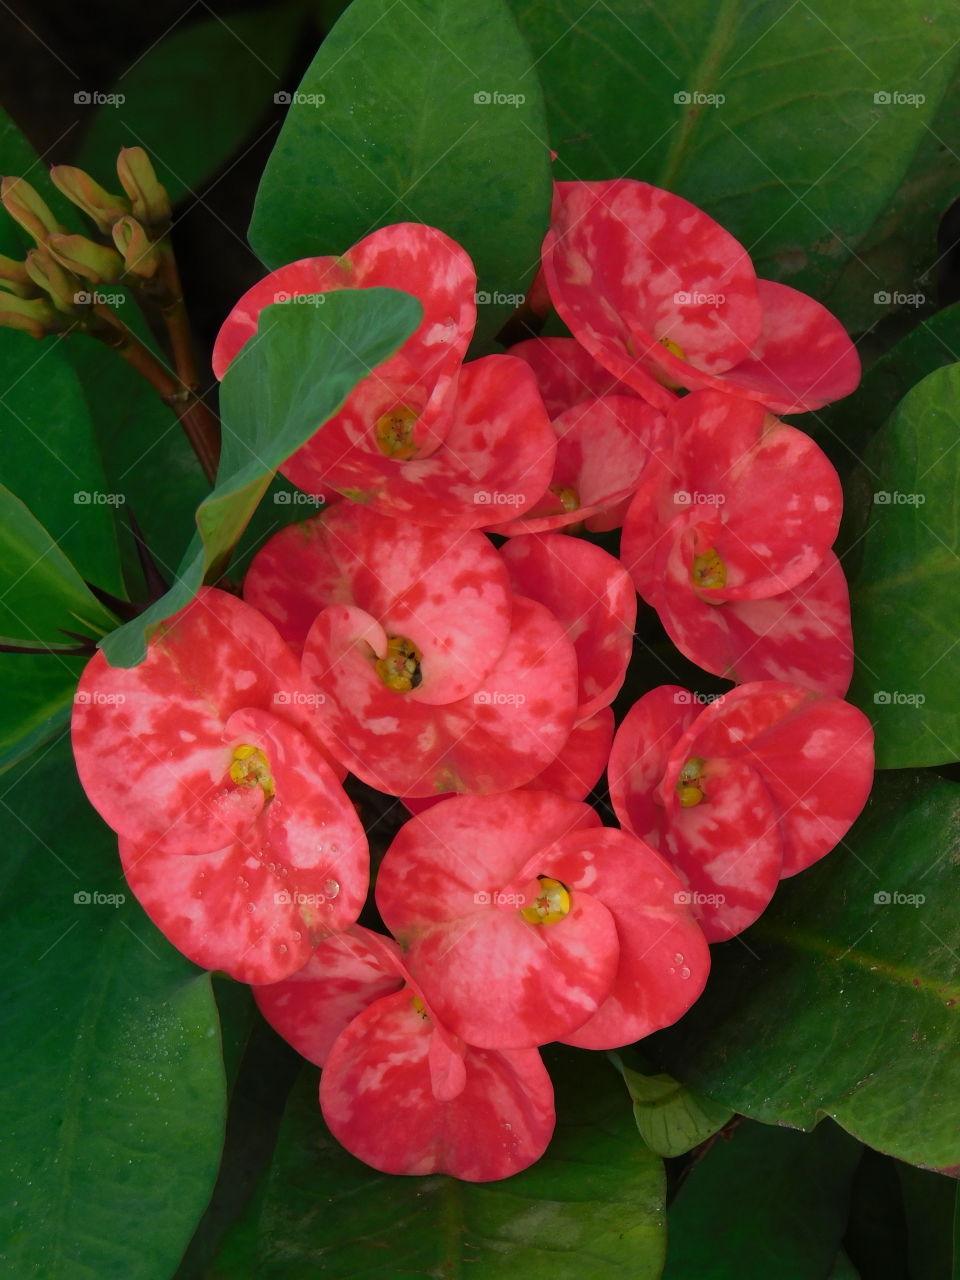 Red Flowers - It is bunch of Red flowers with yellow middle surrounded by green leaves.